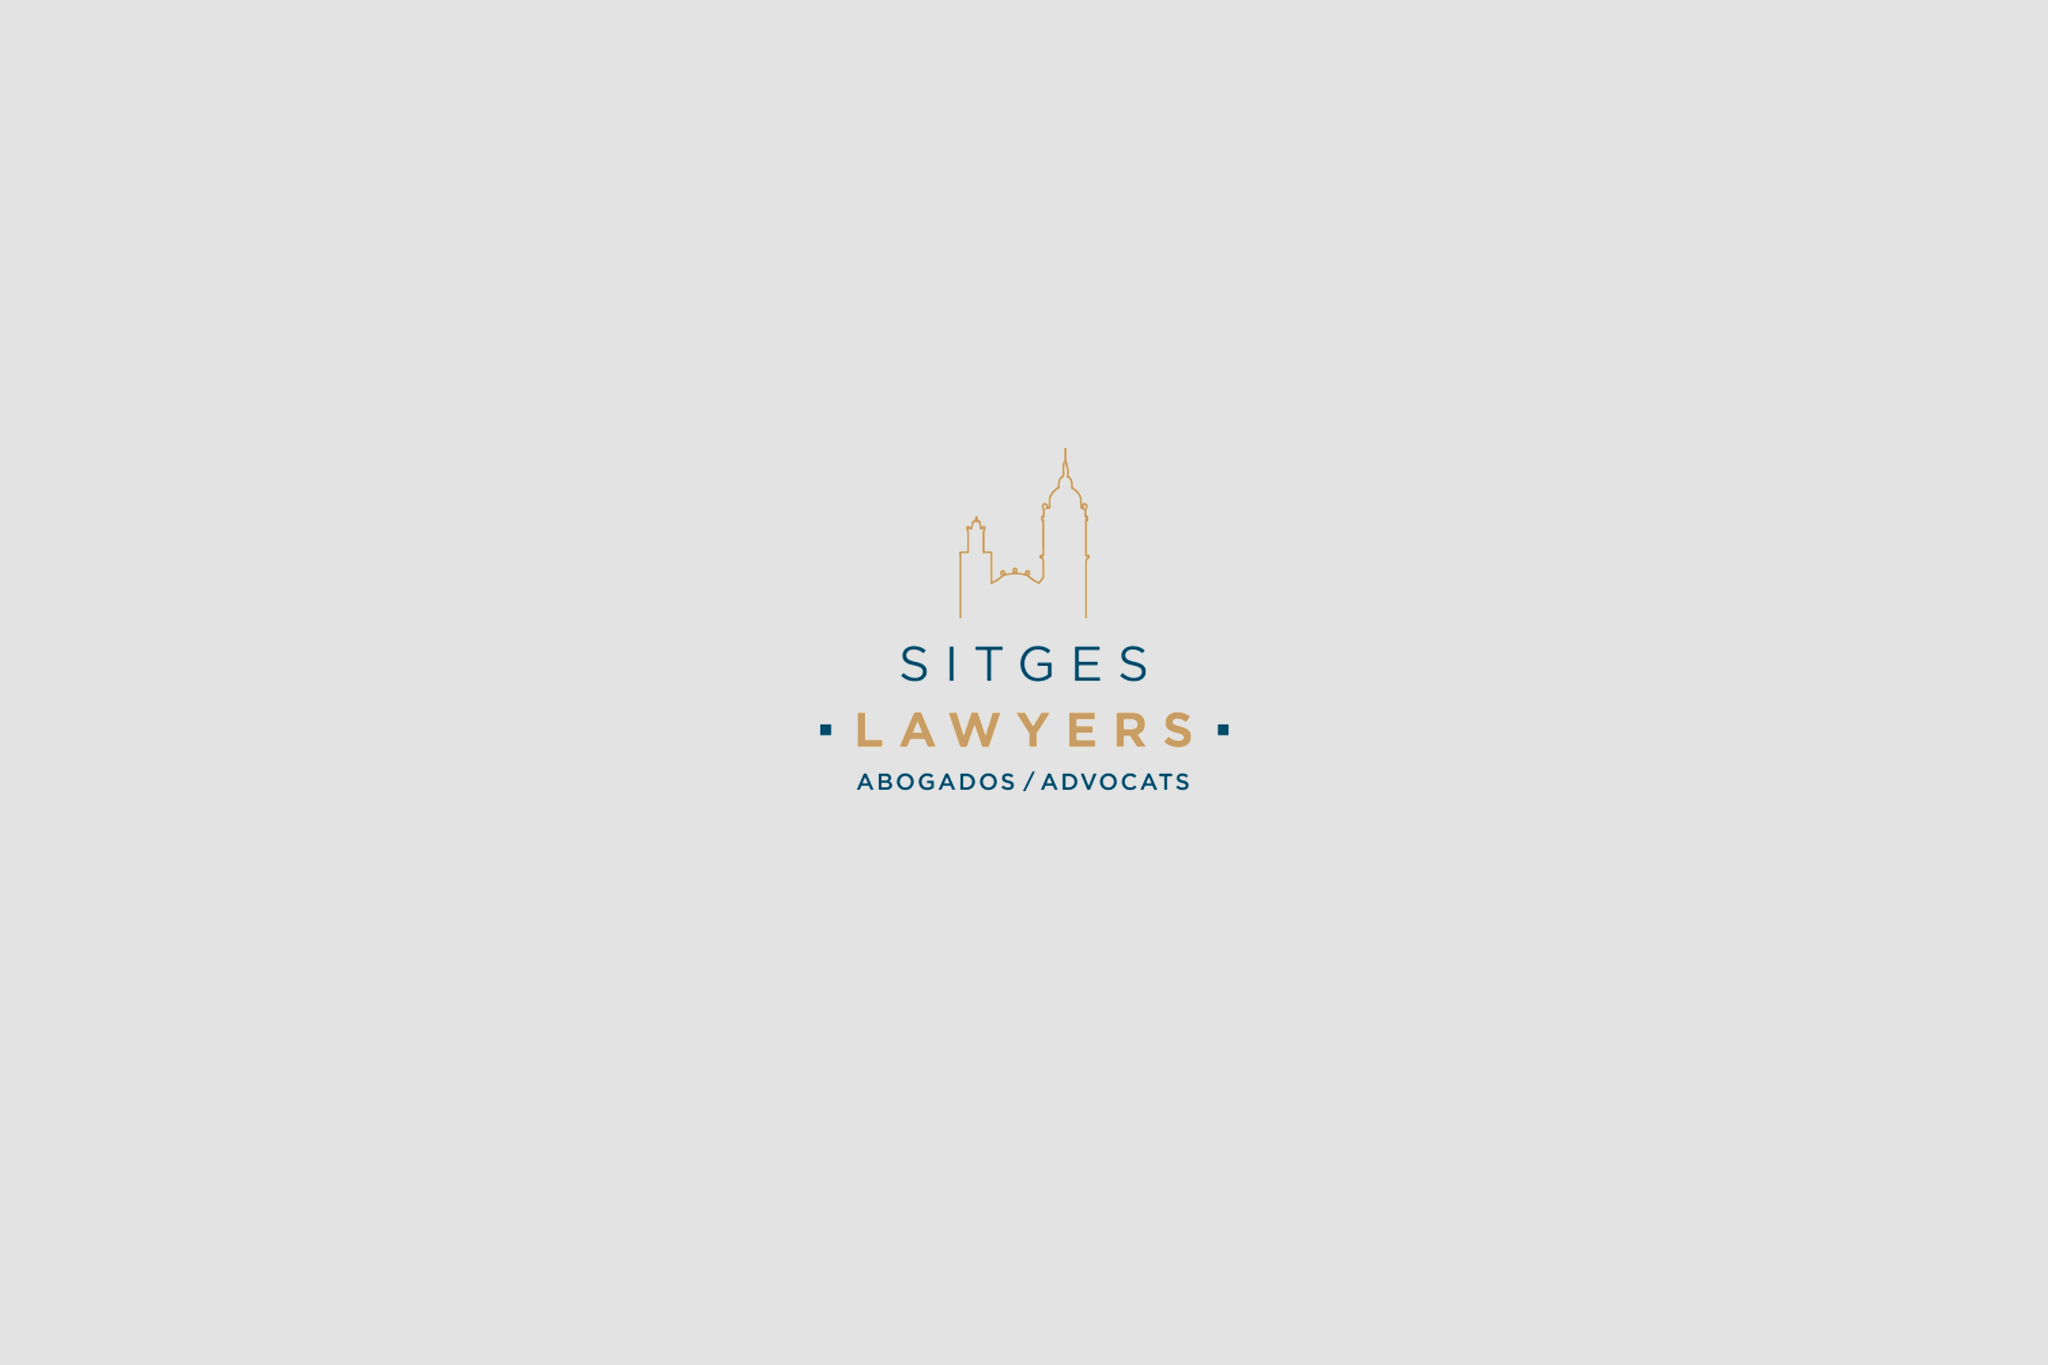 Sitges Lawyers